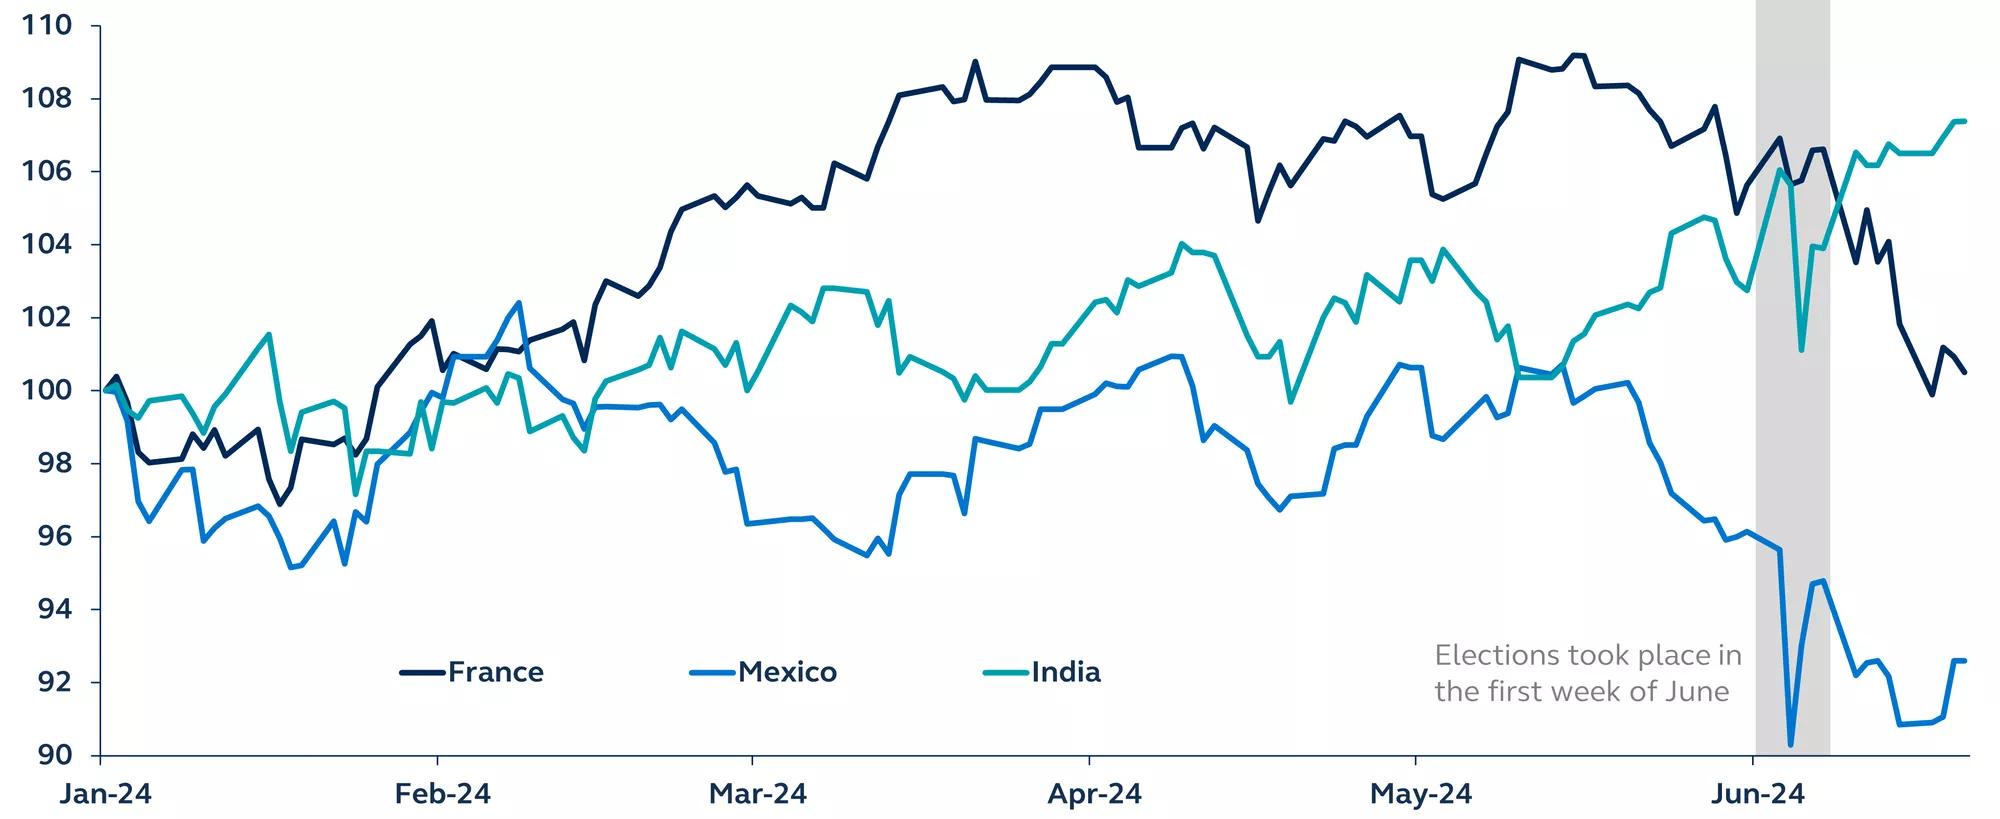 Market performance in France, Mexico and India since the start of the year